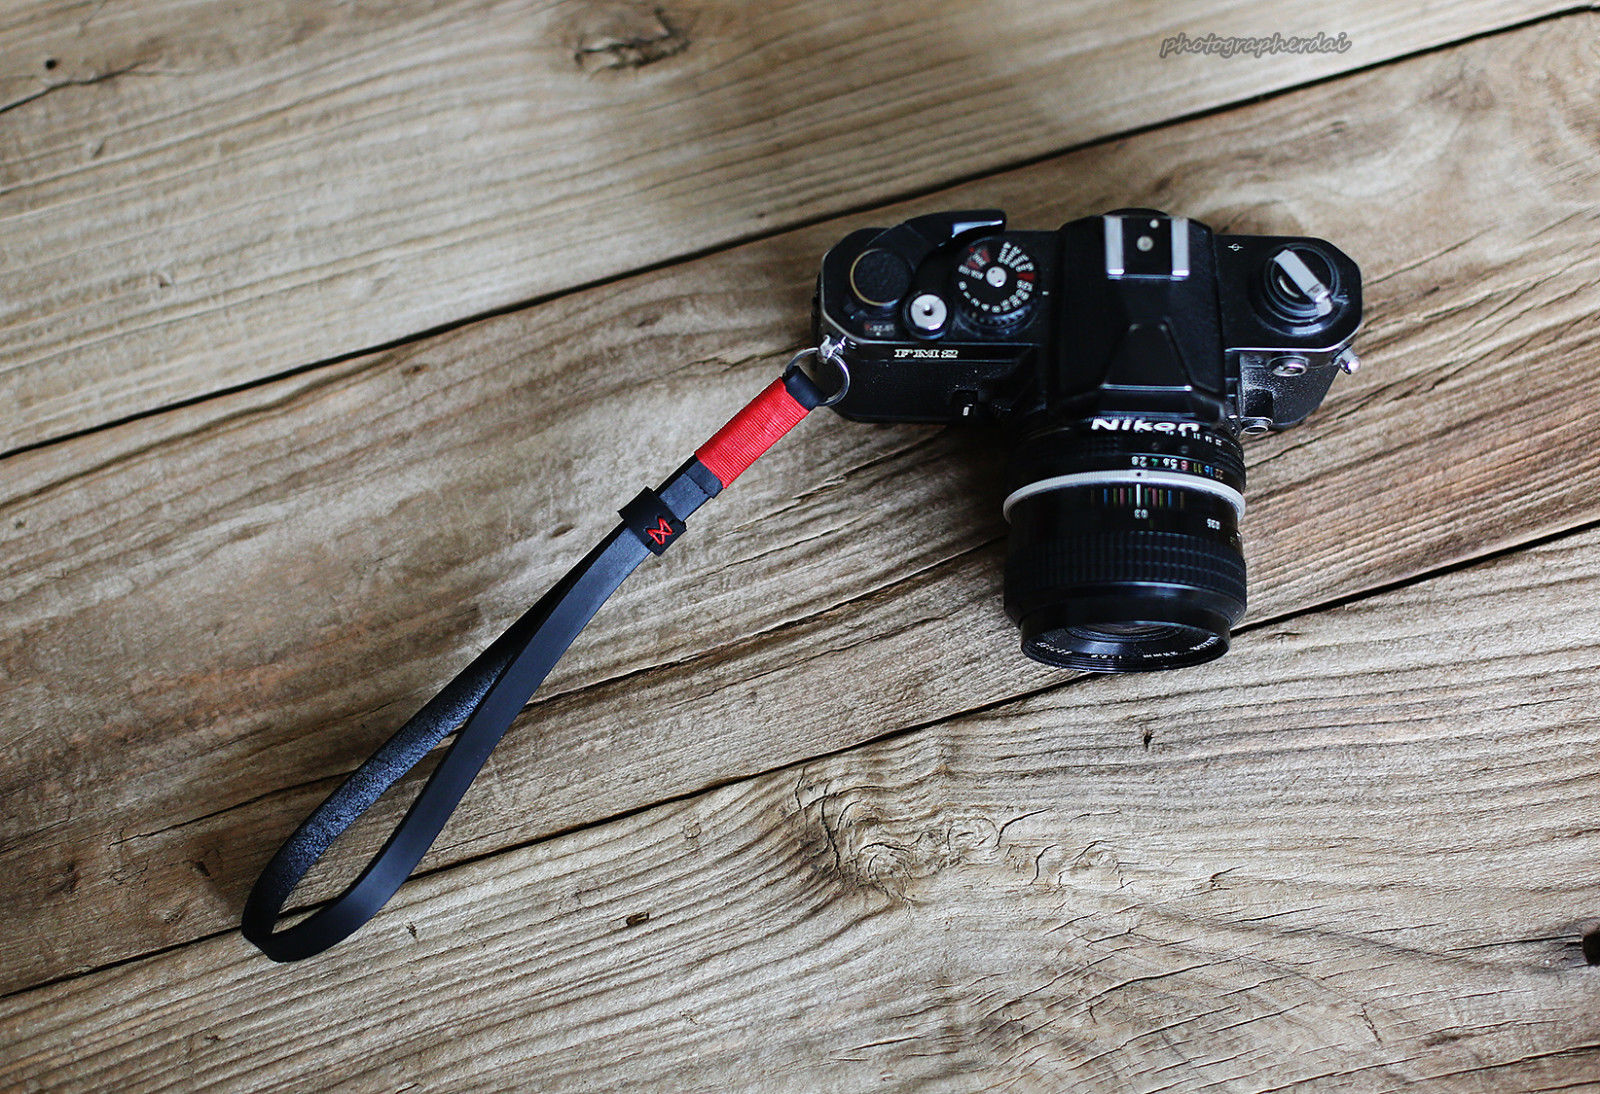 Leather Camera Strap Handmade Leather Strap for Camera 